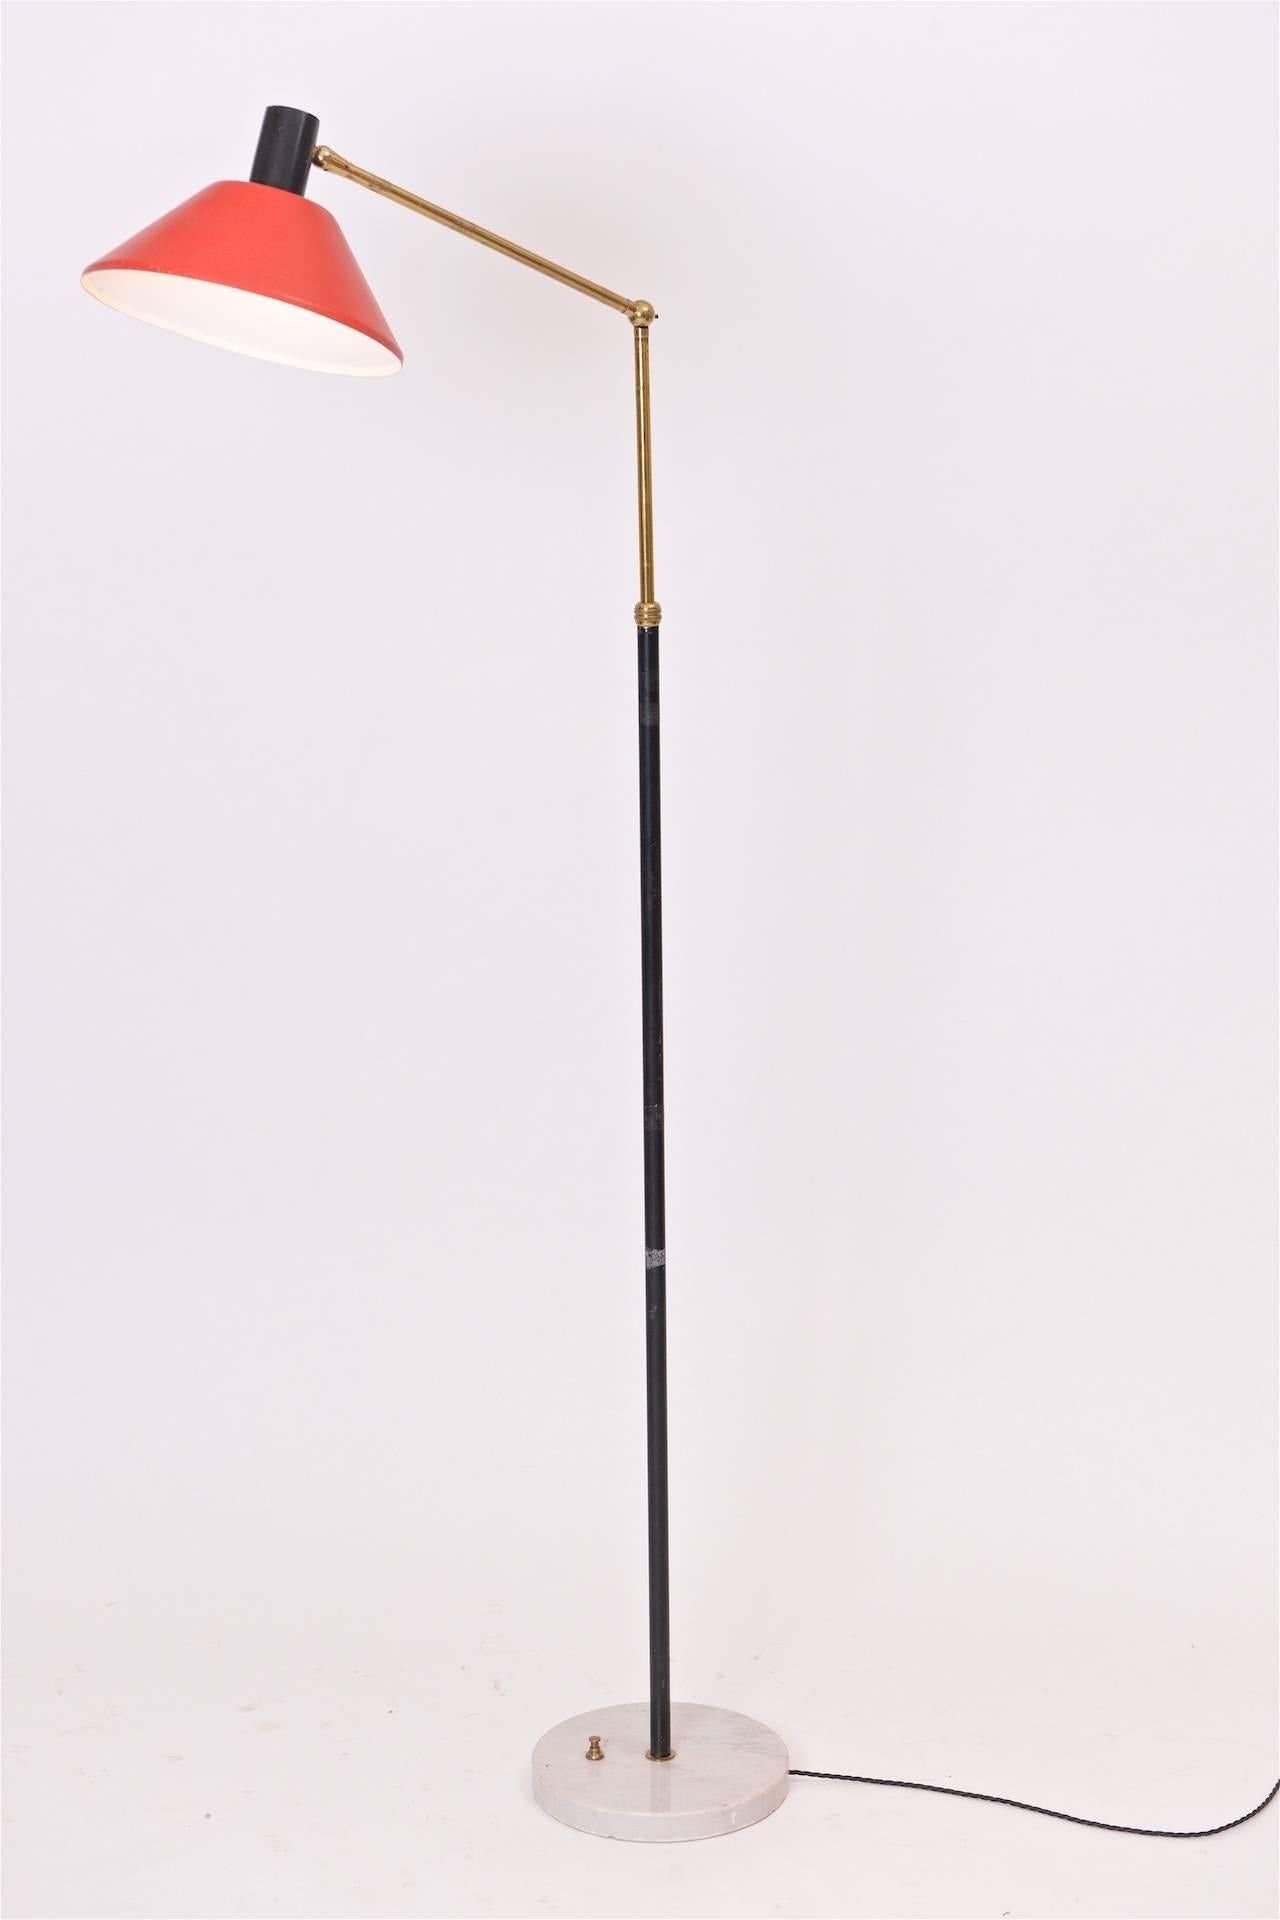 Stilux floor lamp with original red lacquer shade, brass and marble base

Re wired and PAT tested

Dimensions
Fully extended 185cm lowest 142cm x shade 27.5cm (diameter) x marble base 25cm diameter